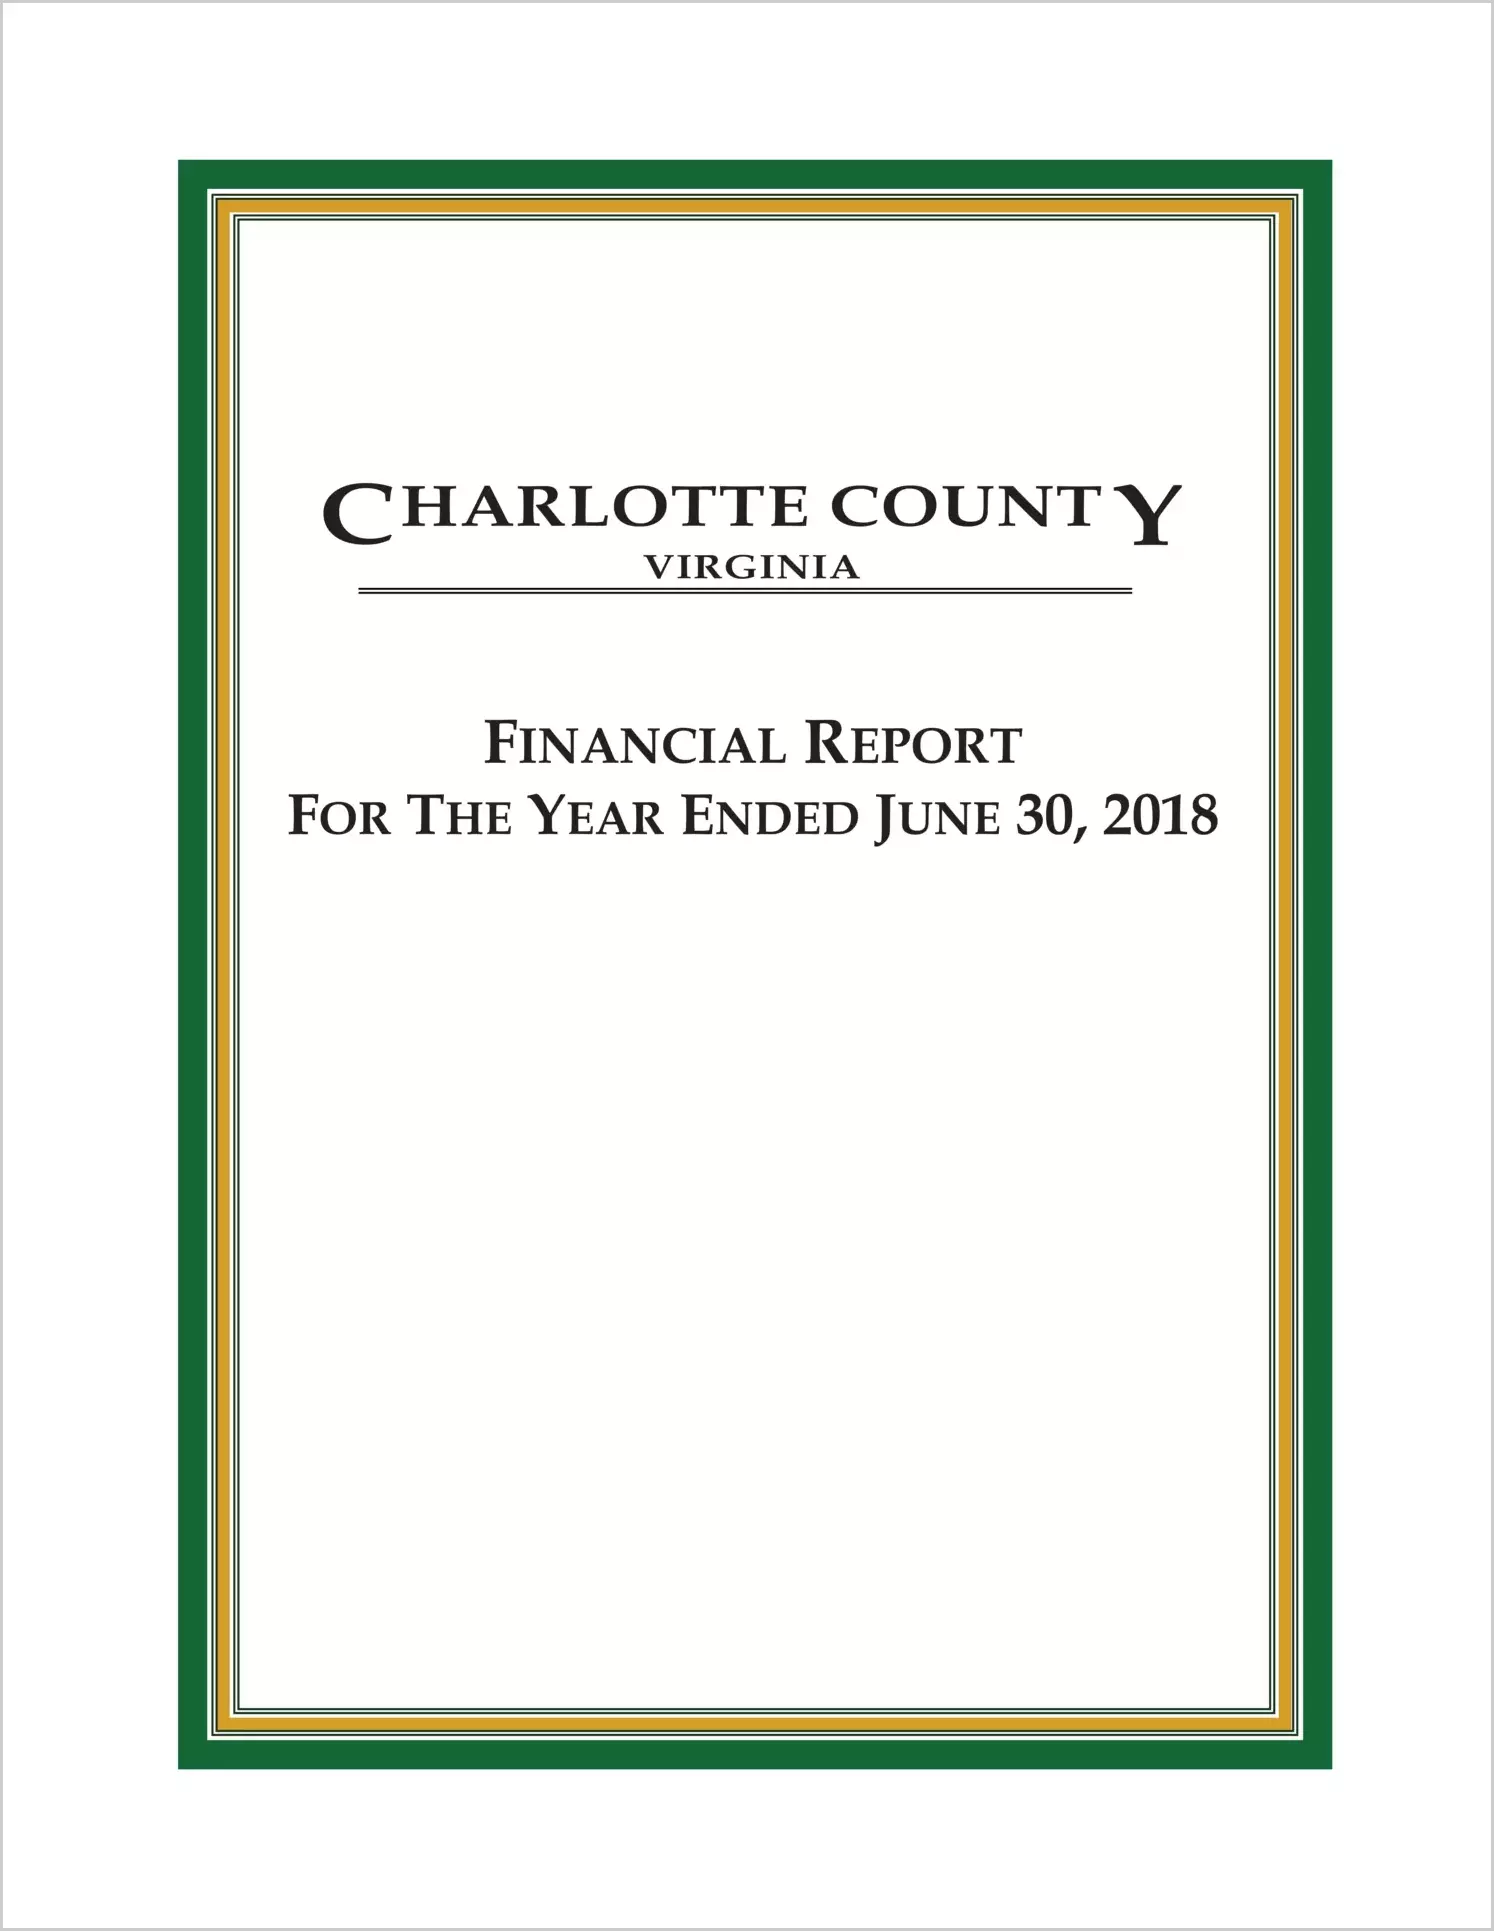 2018 Annual Financial Report for County of Charlotte